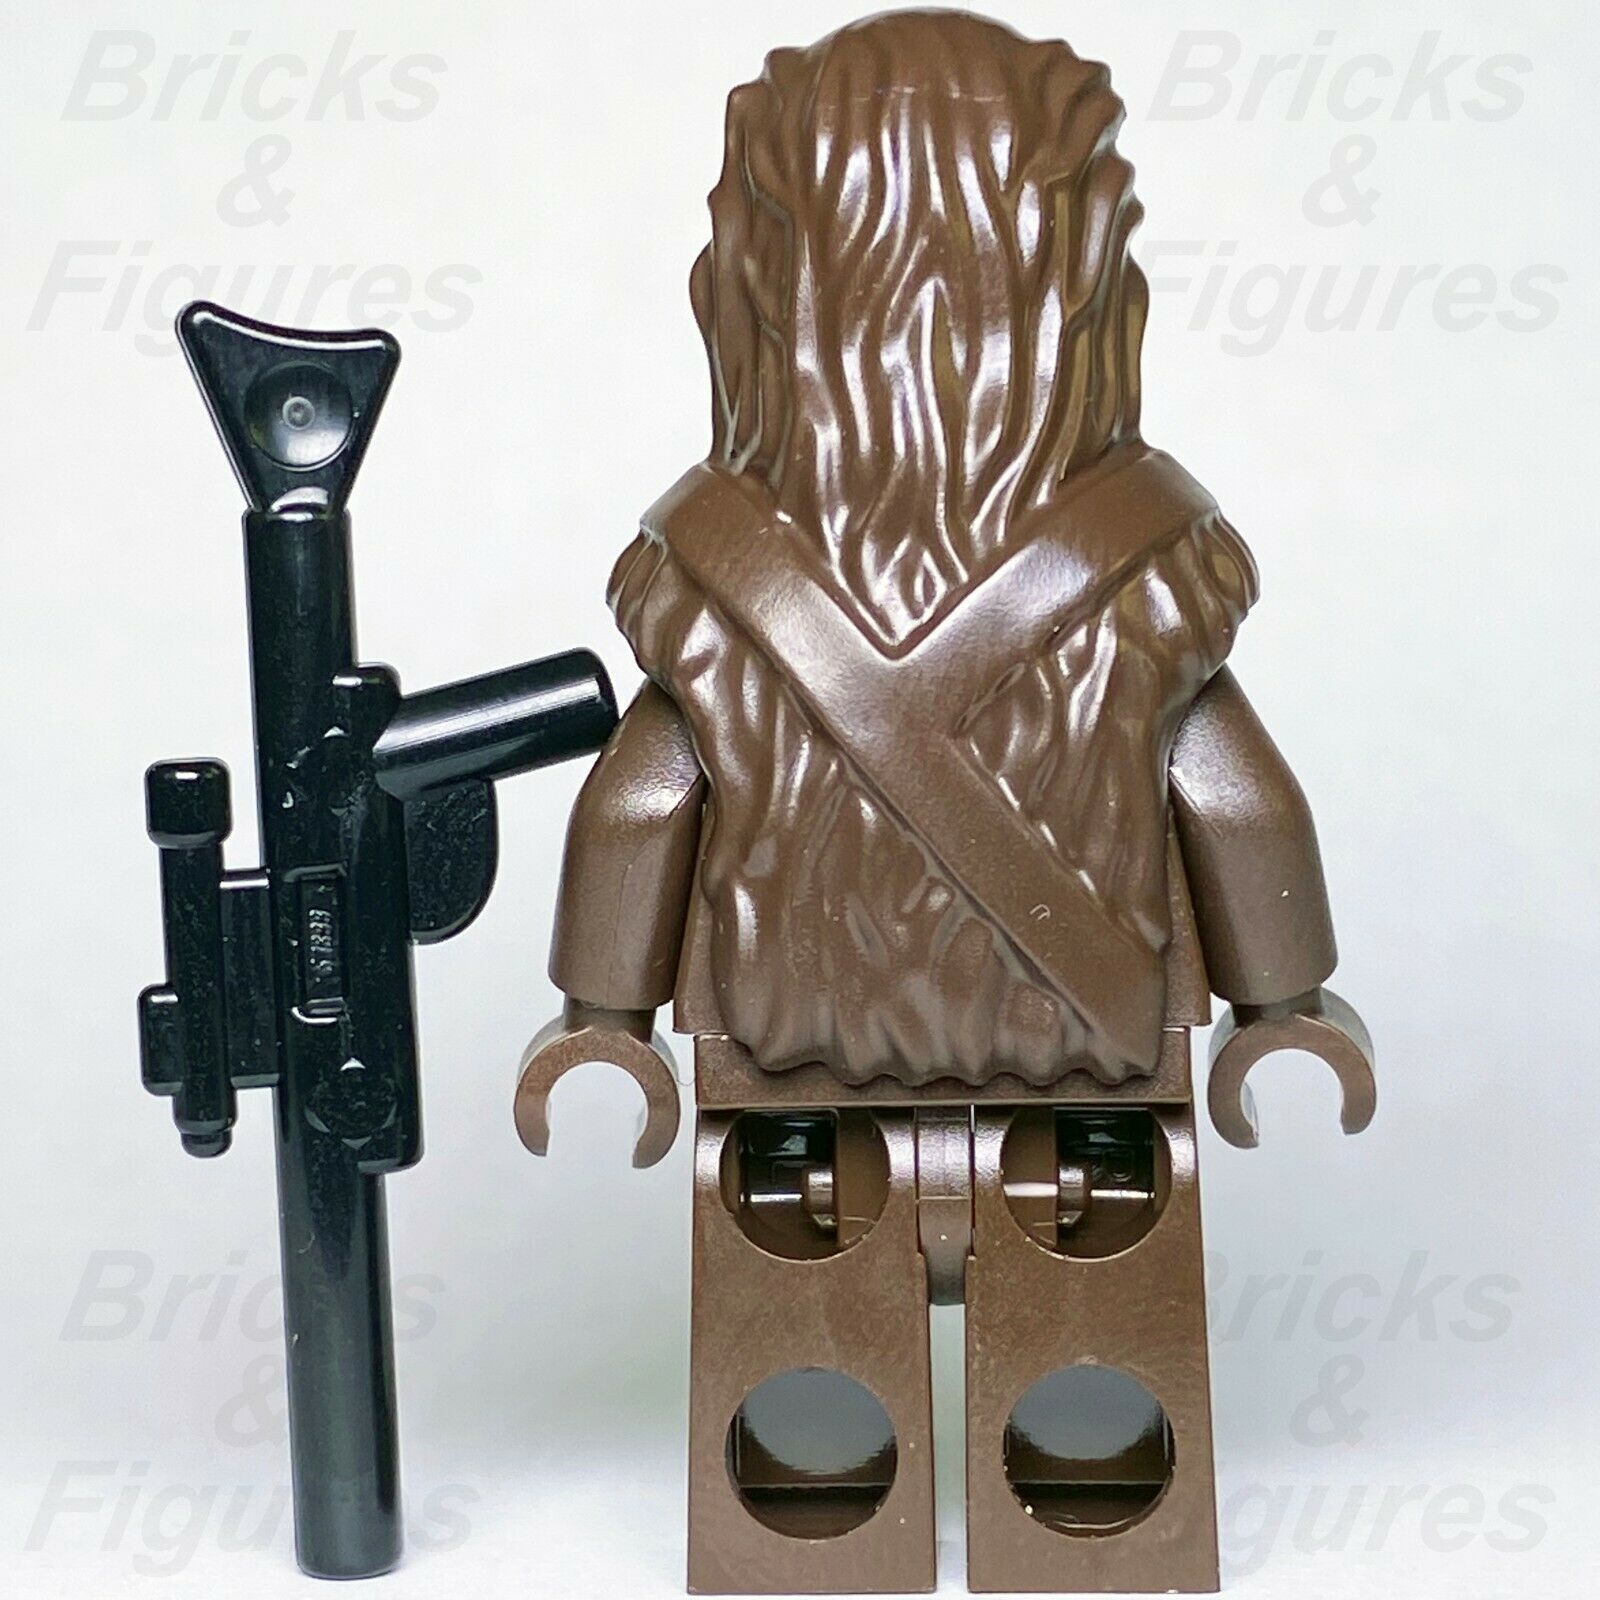 Star Wars LEGO Chewbacca with Crossed Bandoliers Solo Minifigure 75212 75512 - Bricks & Figures